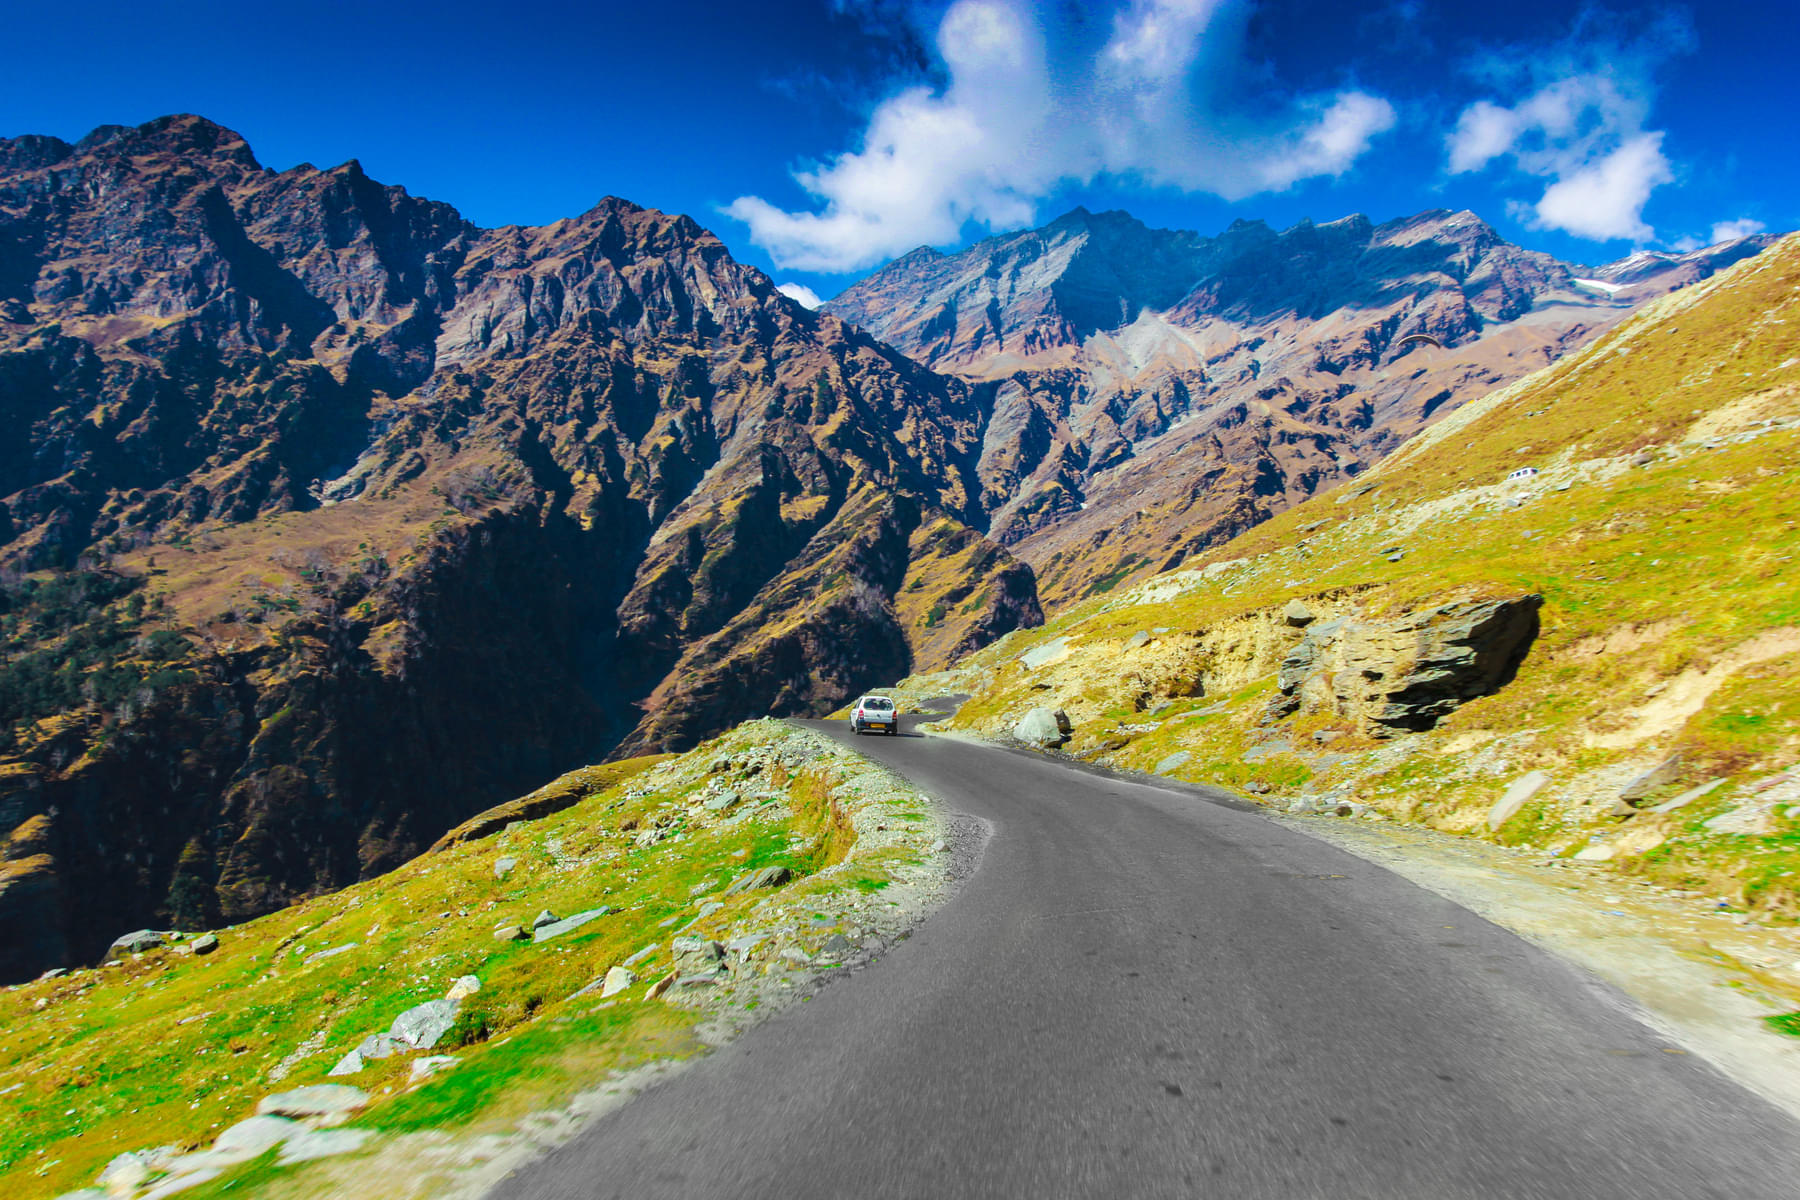 Go on a scenic drive through the mountain ranges of Manali